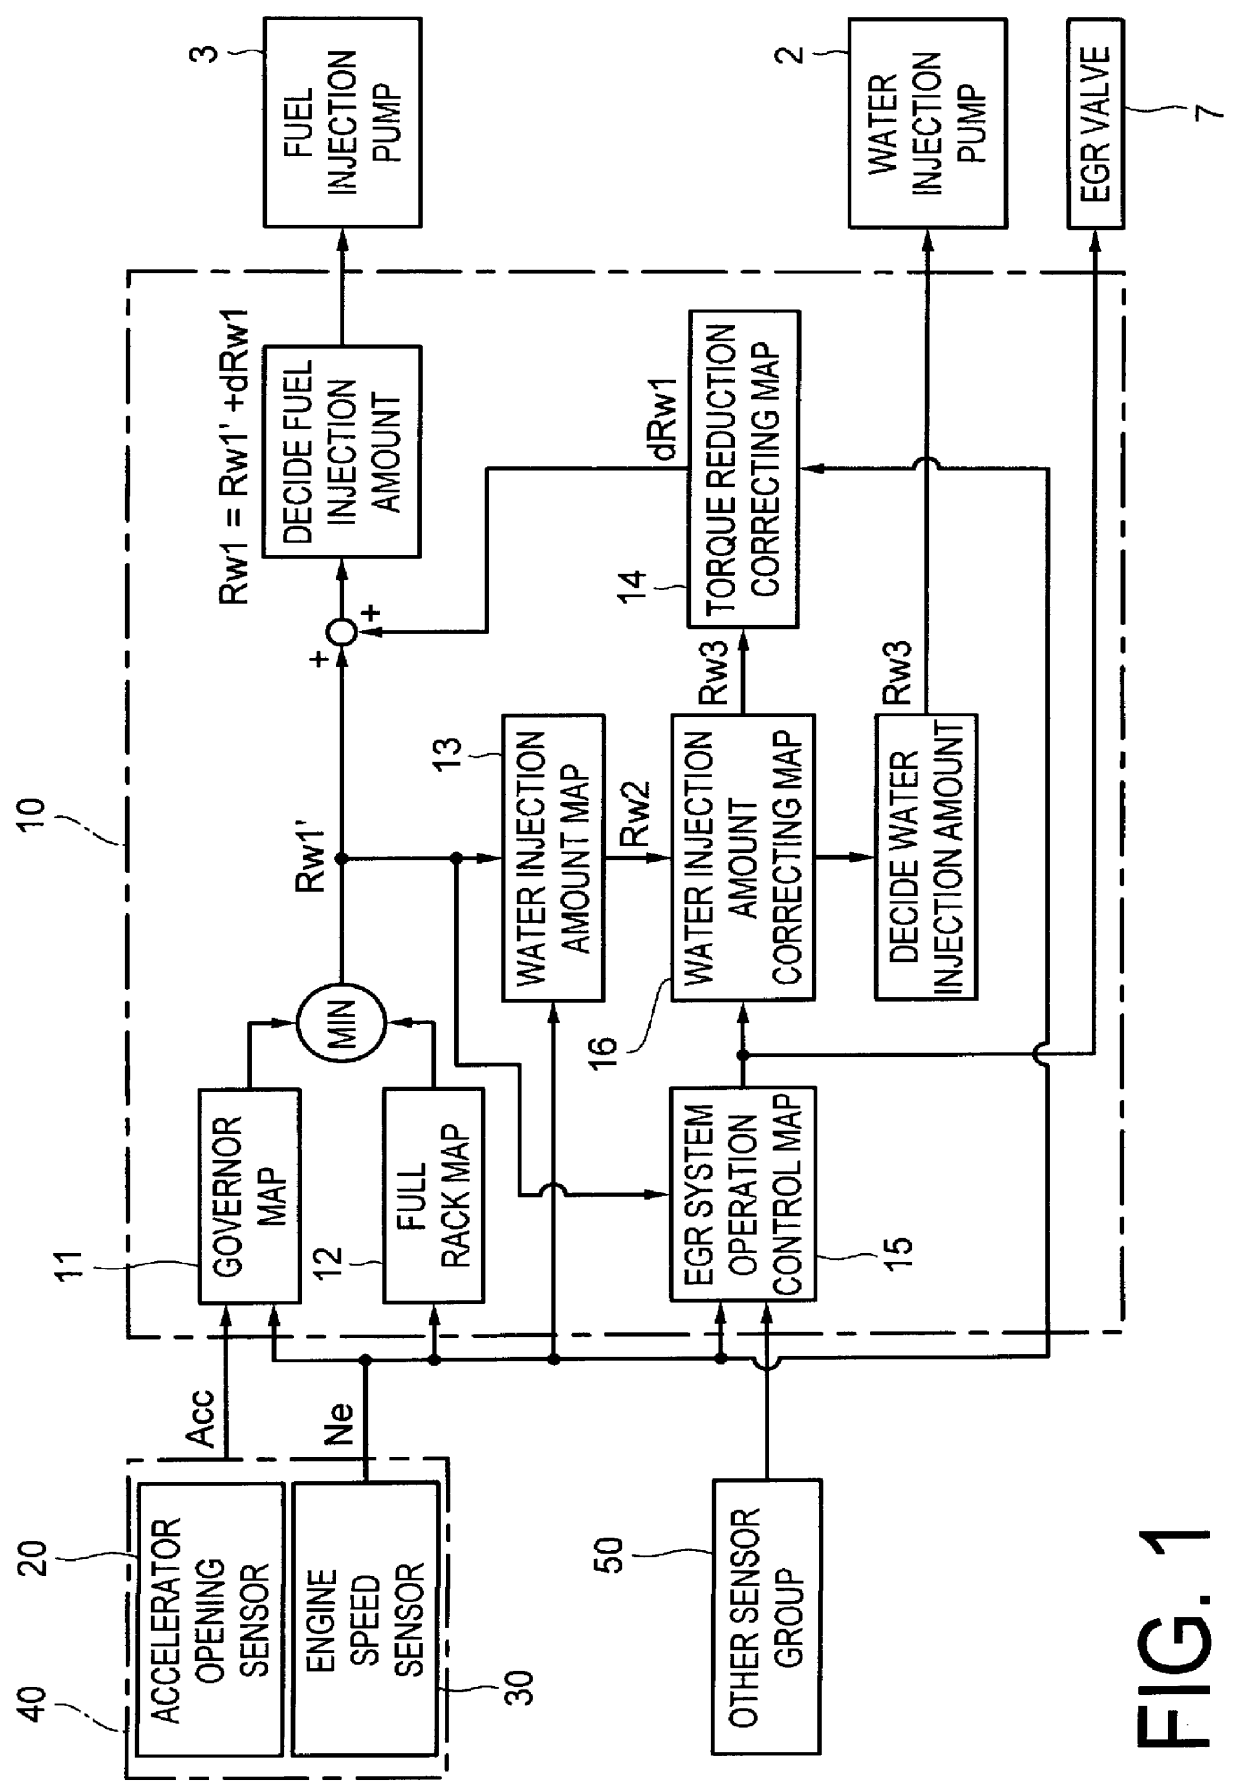 Water injection amount control system for fuel and water injection engine